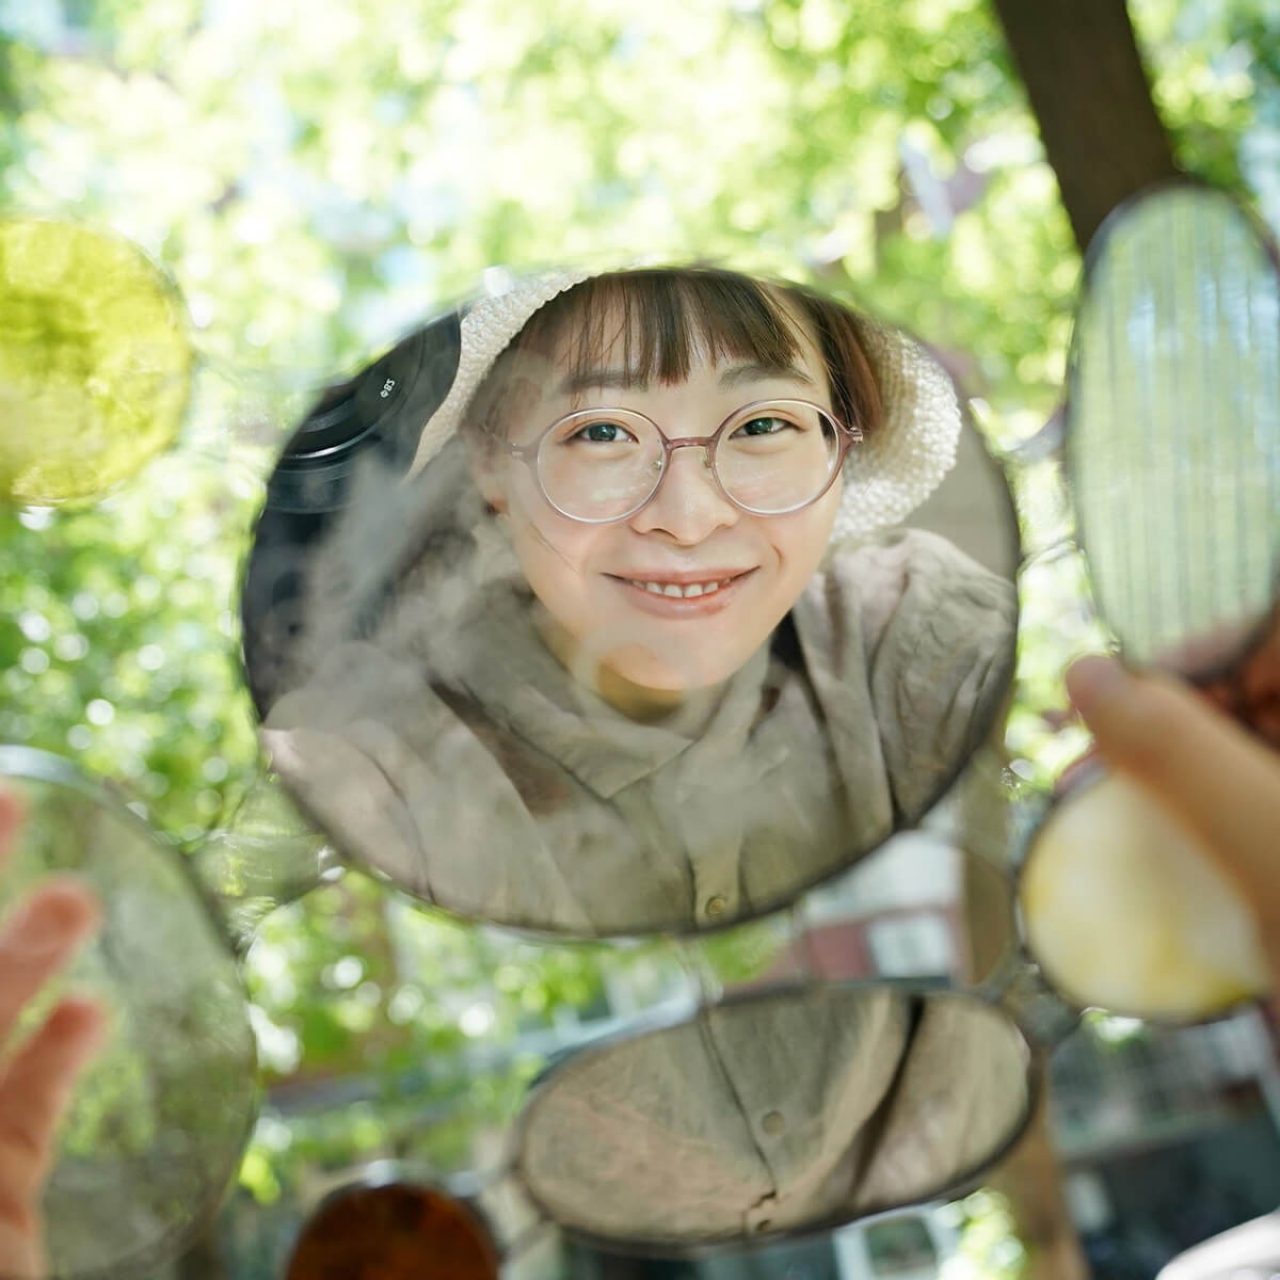 Meng Du wearing glasses, a beige smock and a hat smiles through the reflection of a rounded mirror in a garden setting